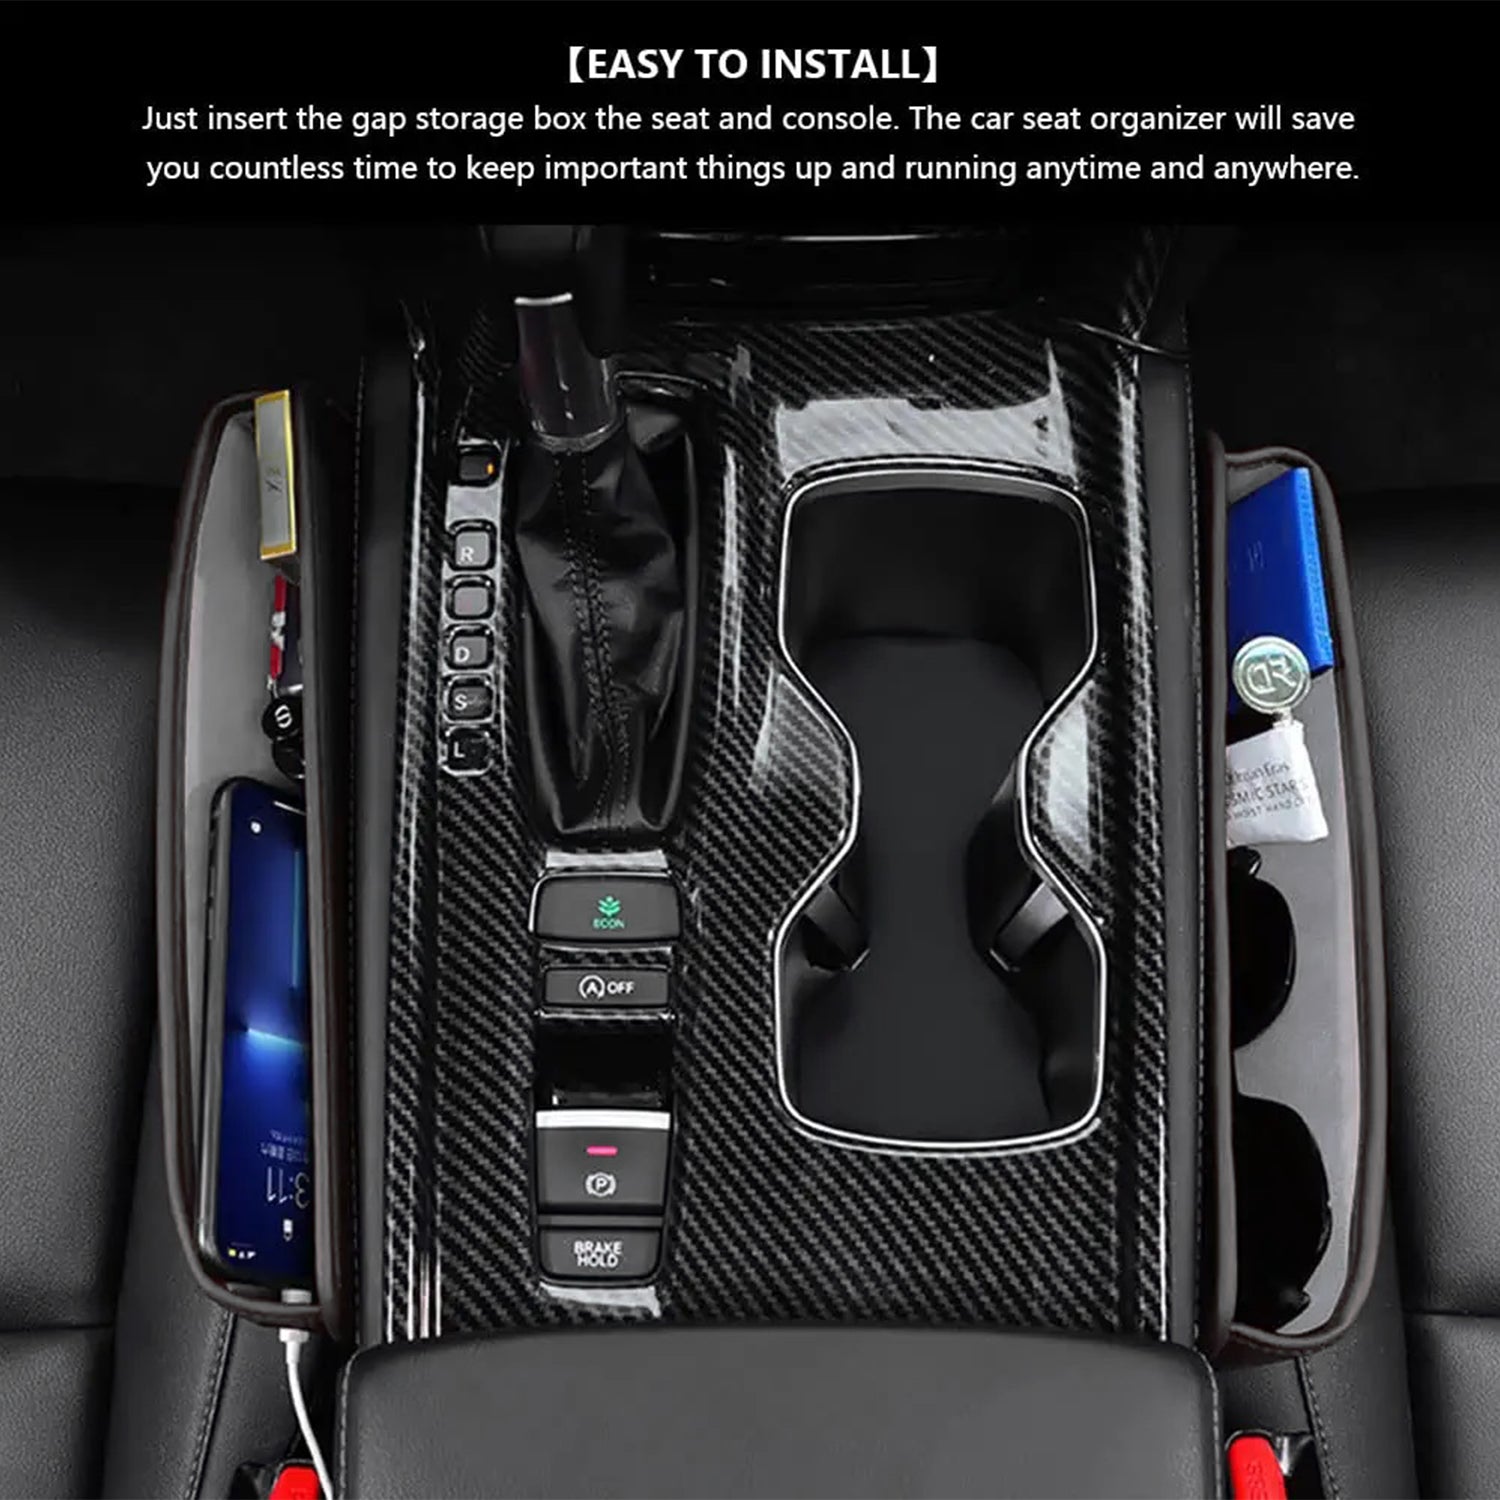 Car Seat Gap Filler Organizer, Custom Fir For Your Cars, Multifunctional PU Leather Console Side Pocket Organizer for Cellphones, Cards, Wallets, Keys